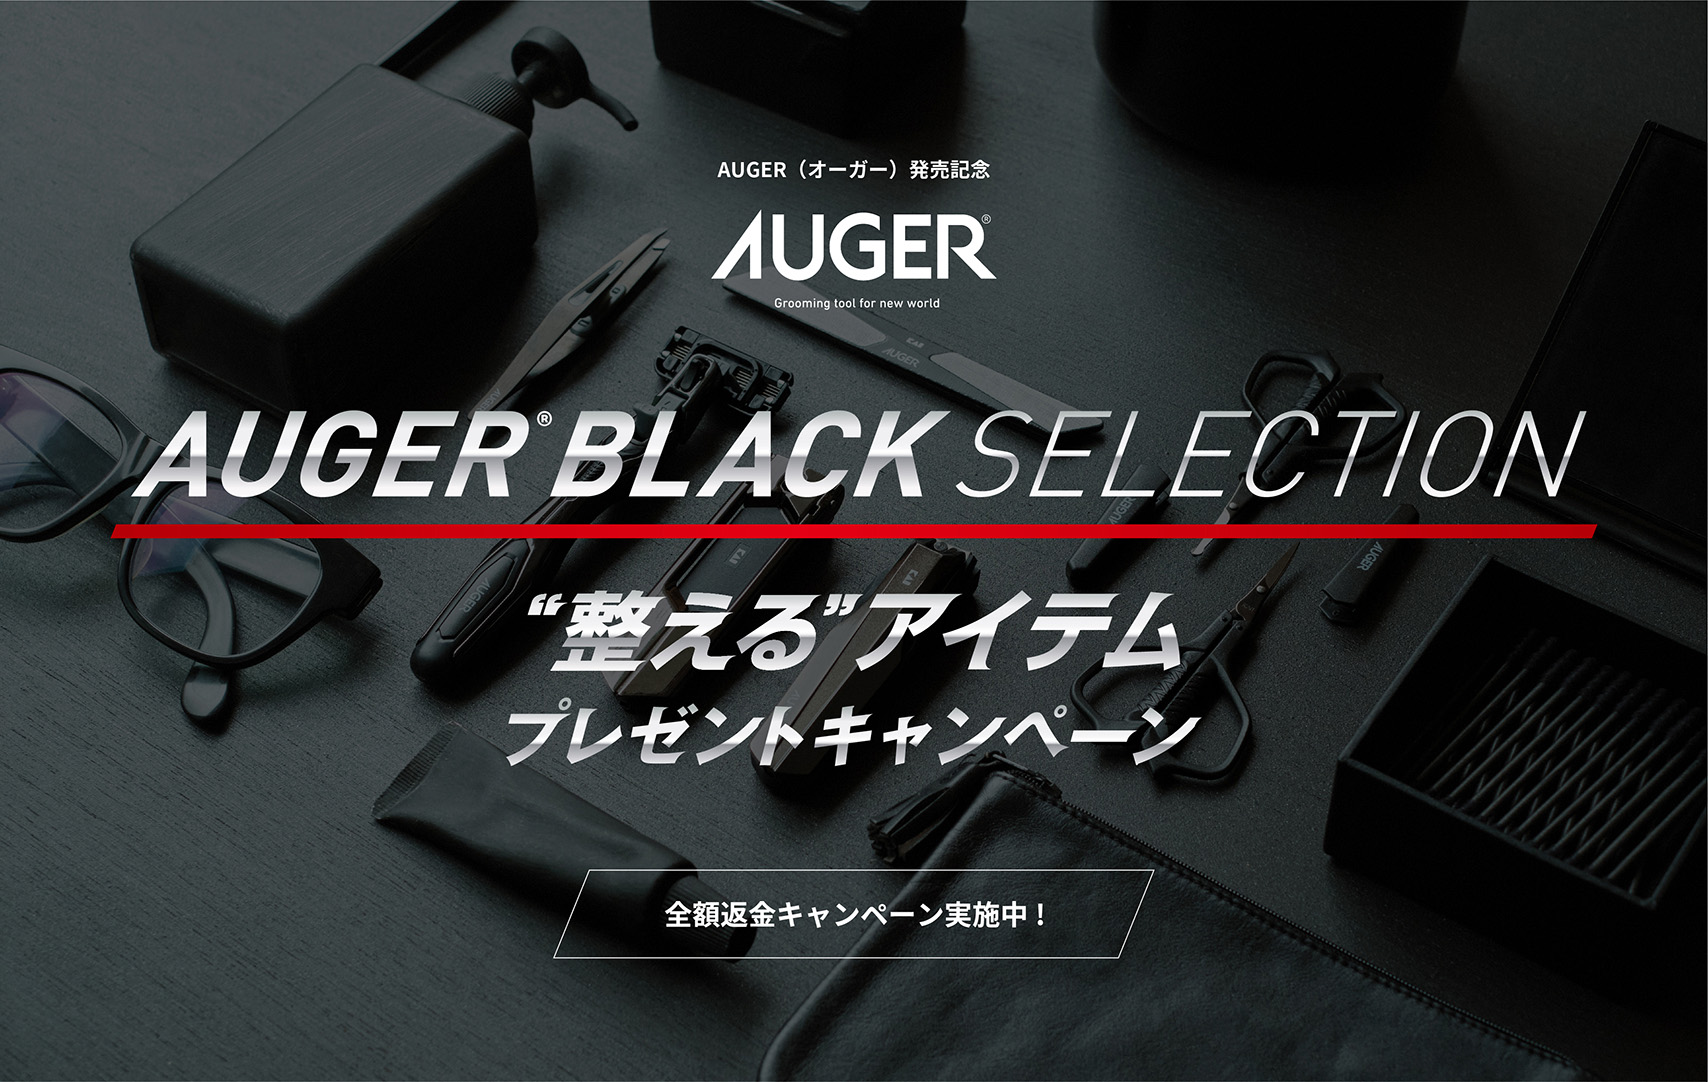 AUGER BLACK SELECTION 整えるアイテムプレゼントキャンペーン